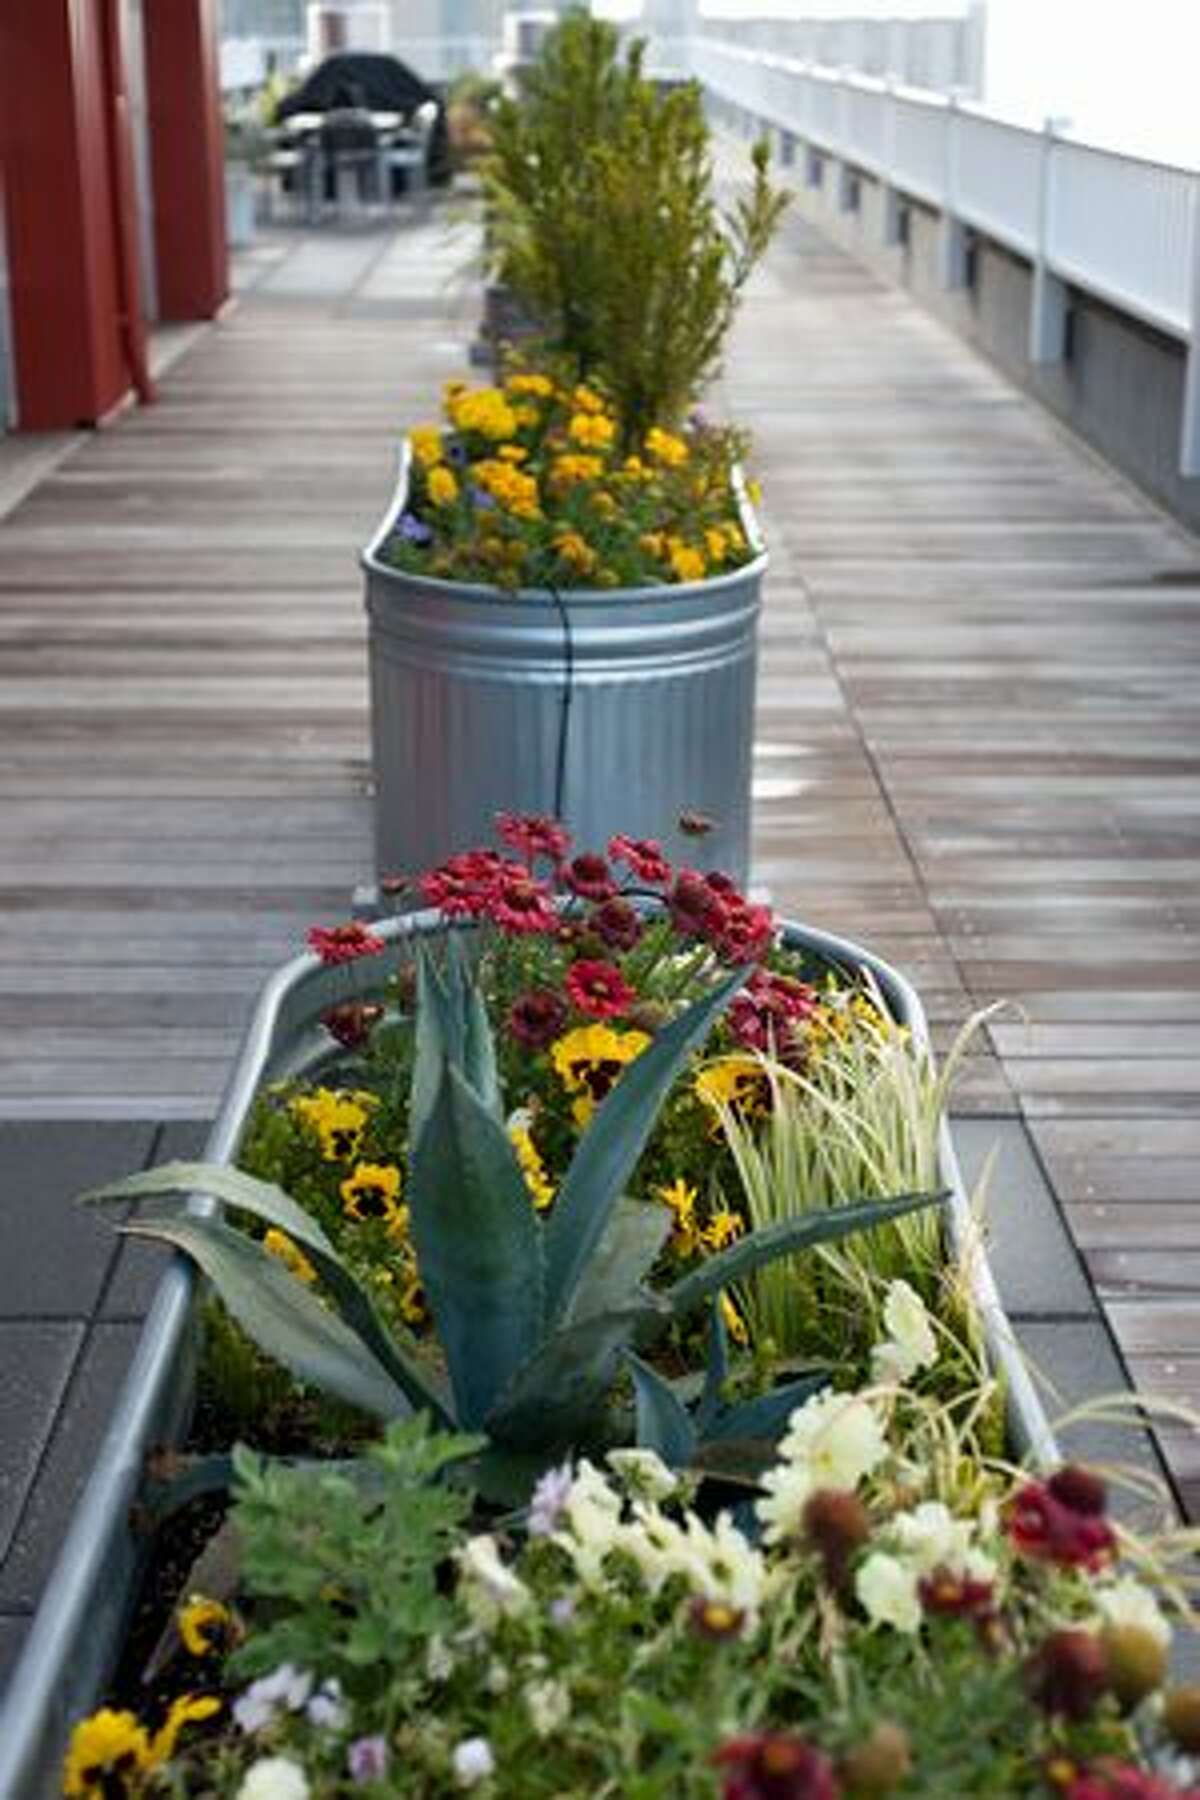 Small flowers and various plants are kept in containers on the roof.